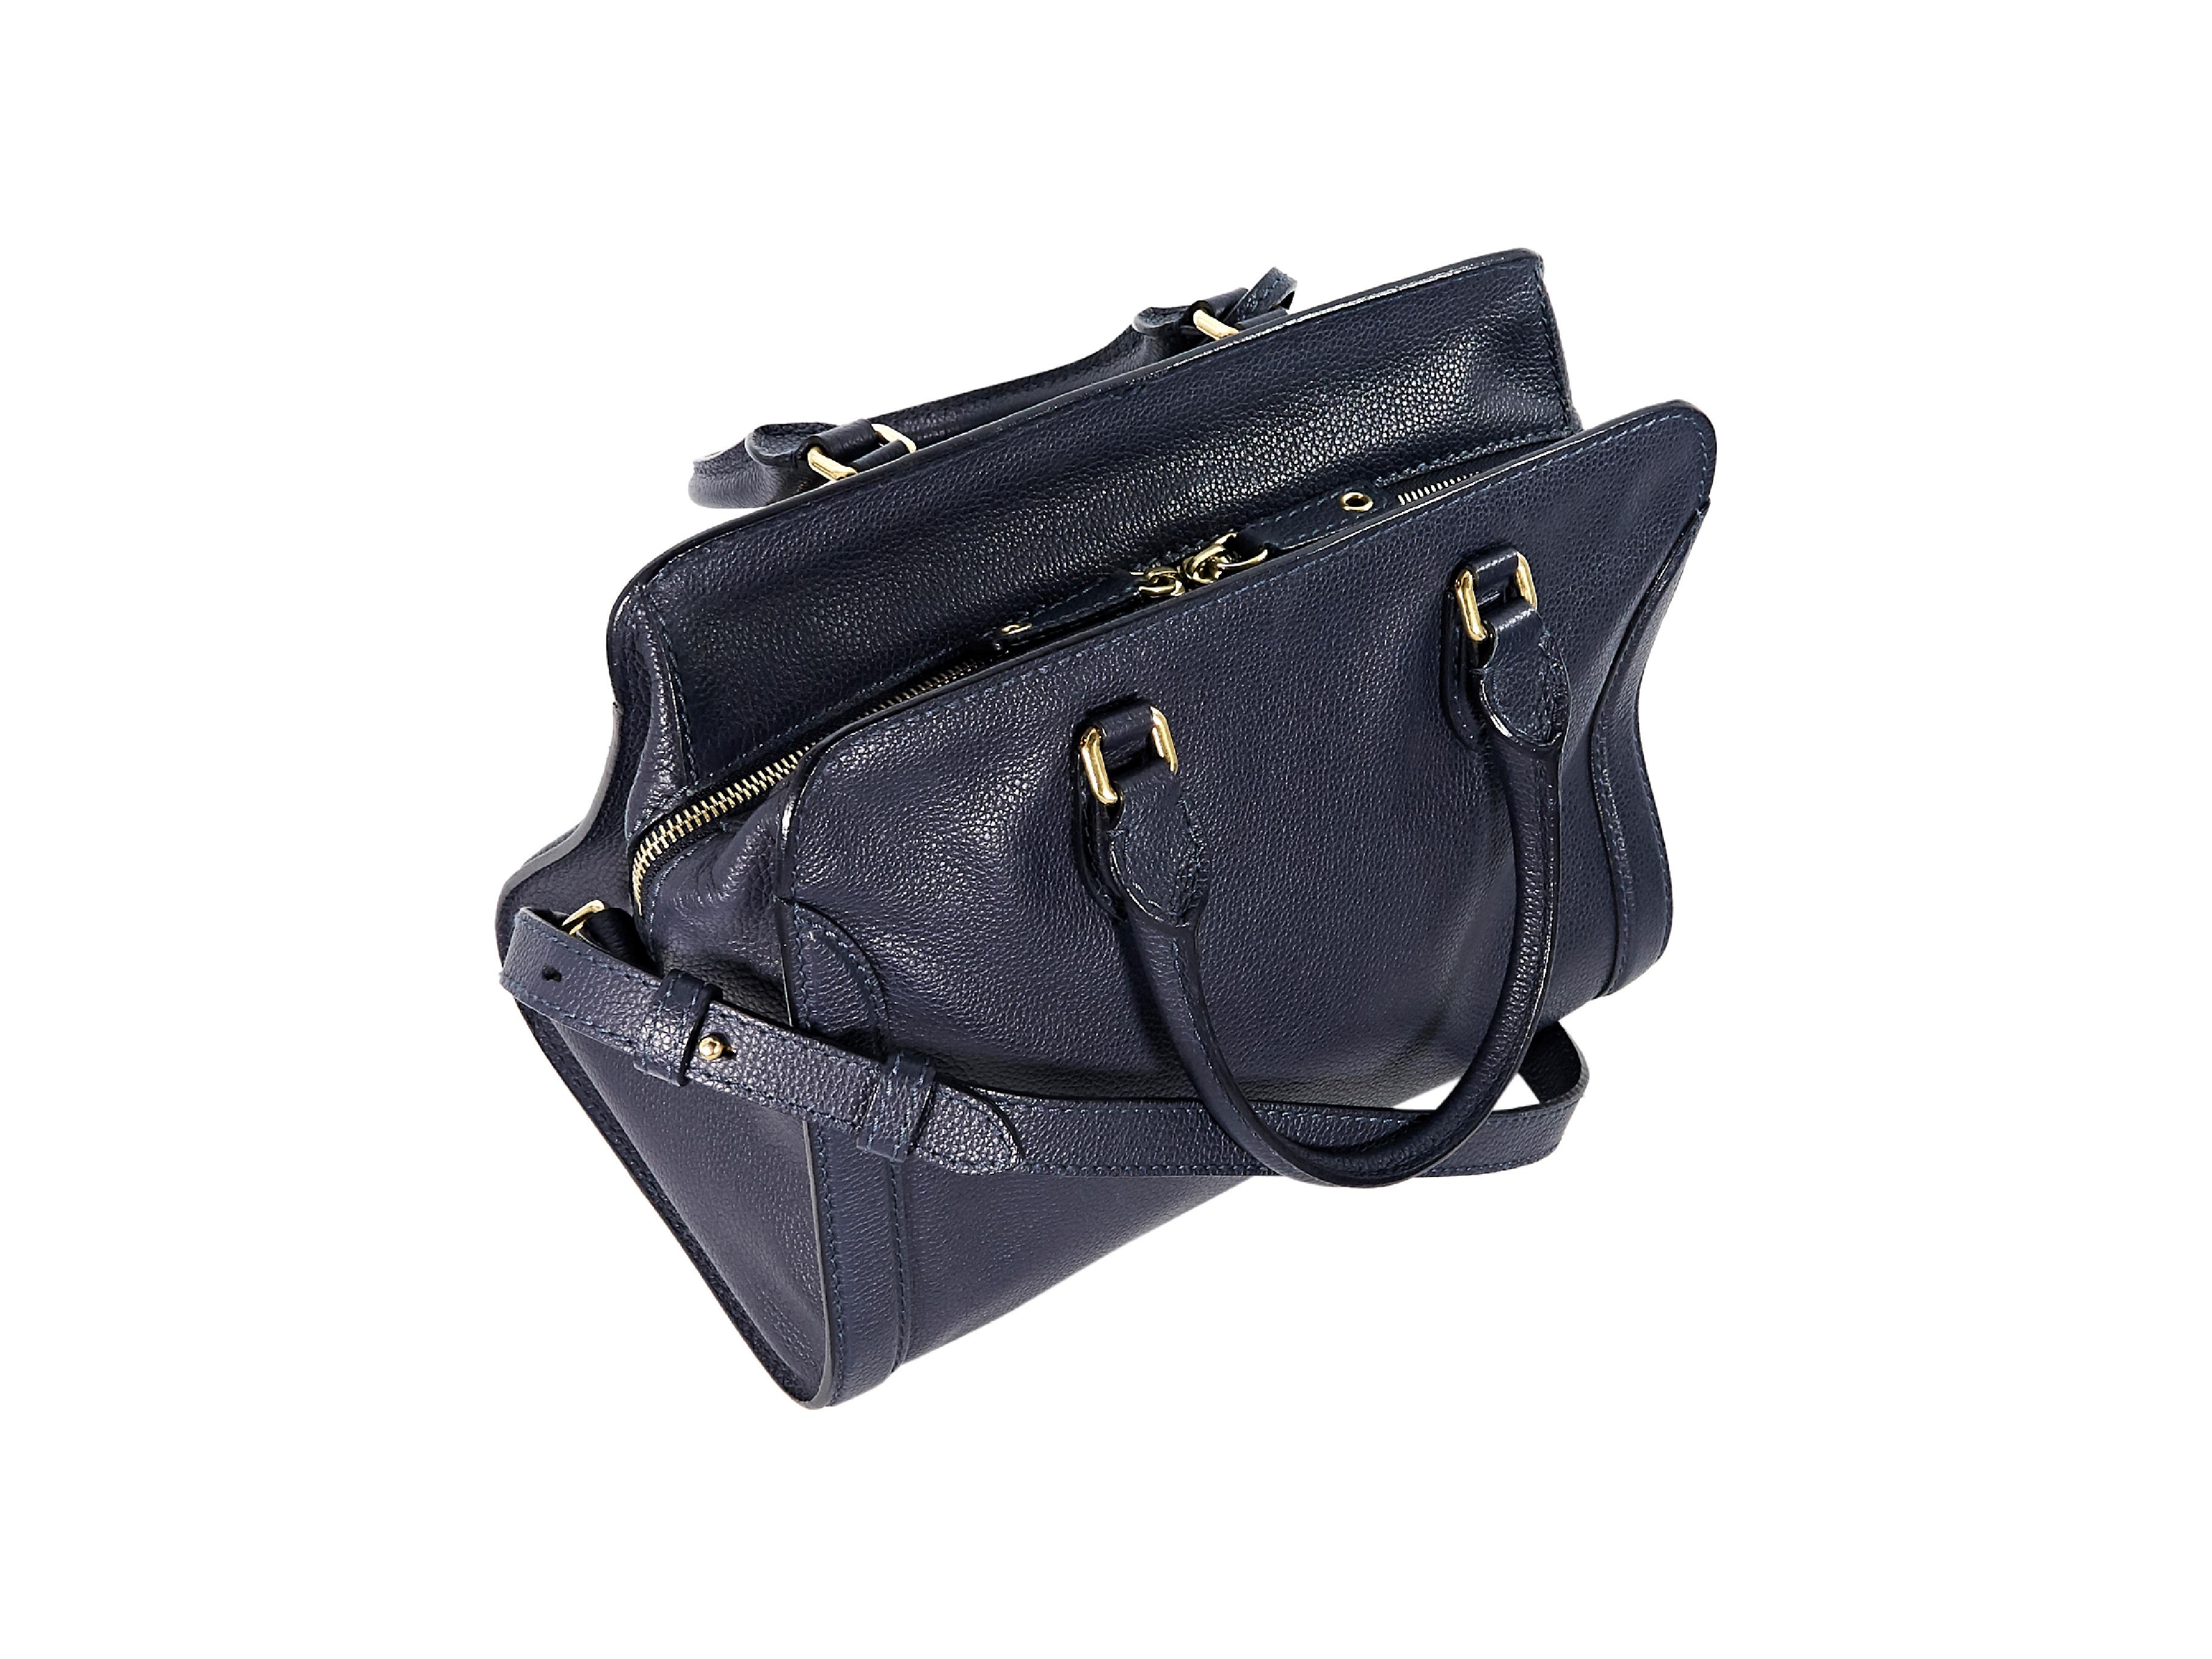 Product details:  Navy blue leather padlock satchel by Alexander McQueen.  Dual carry handles.  Detachable, adjustable crossbody strap.  Top zip closure.  Lined interior with inner zip and slide pockets.  Goldtone hardware.  12